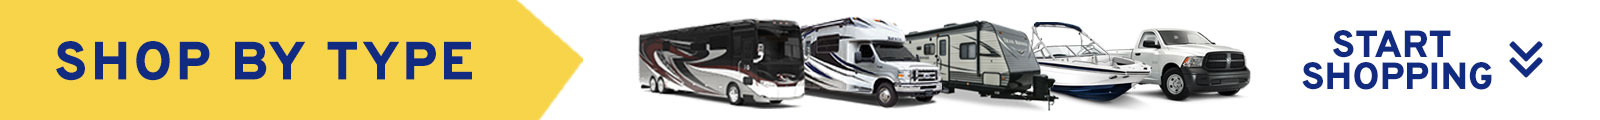 View RV Types Banner